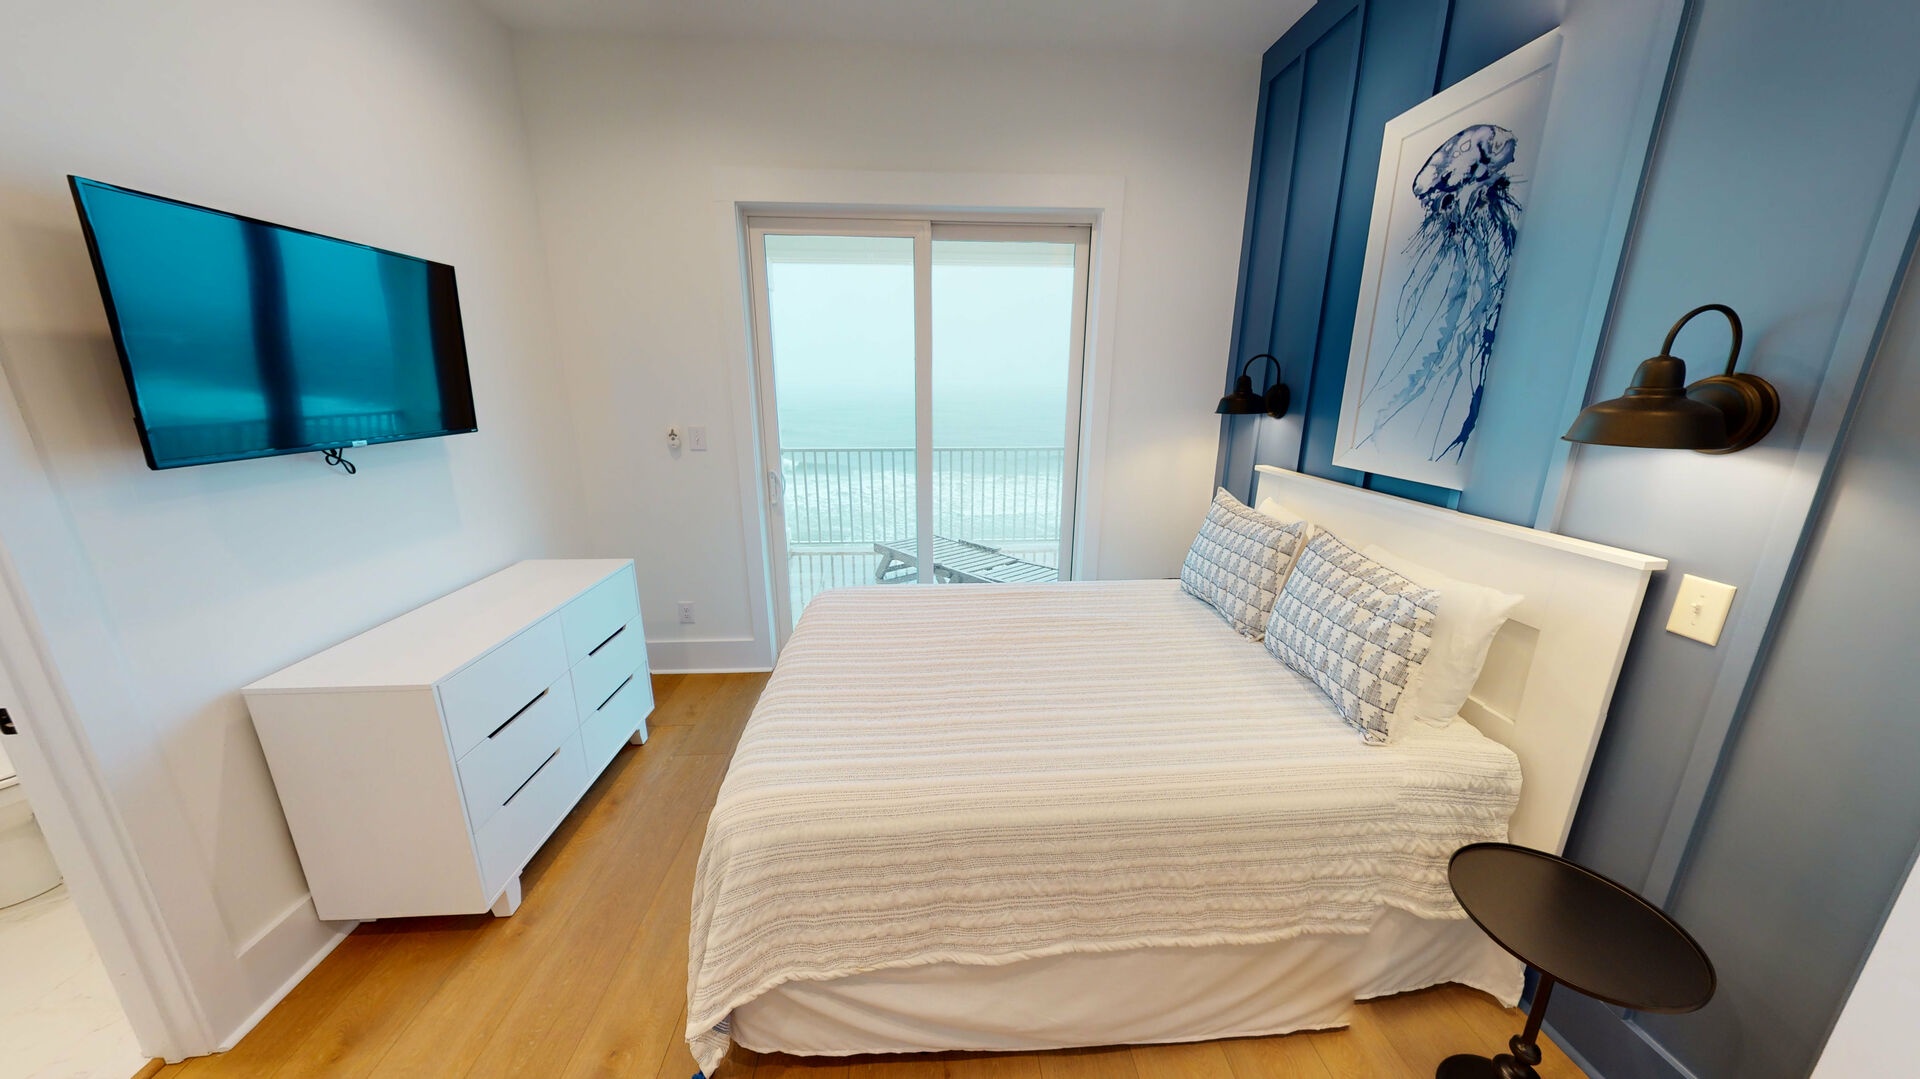 Bedroom #4 is on the 3rd floor with a queen bed, TV, private bathroom, Gulf views and balcony access